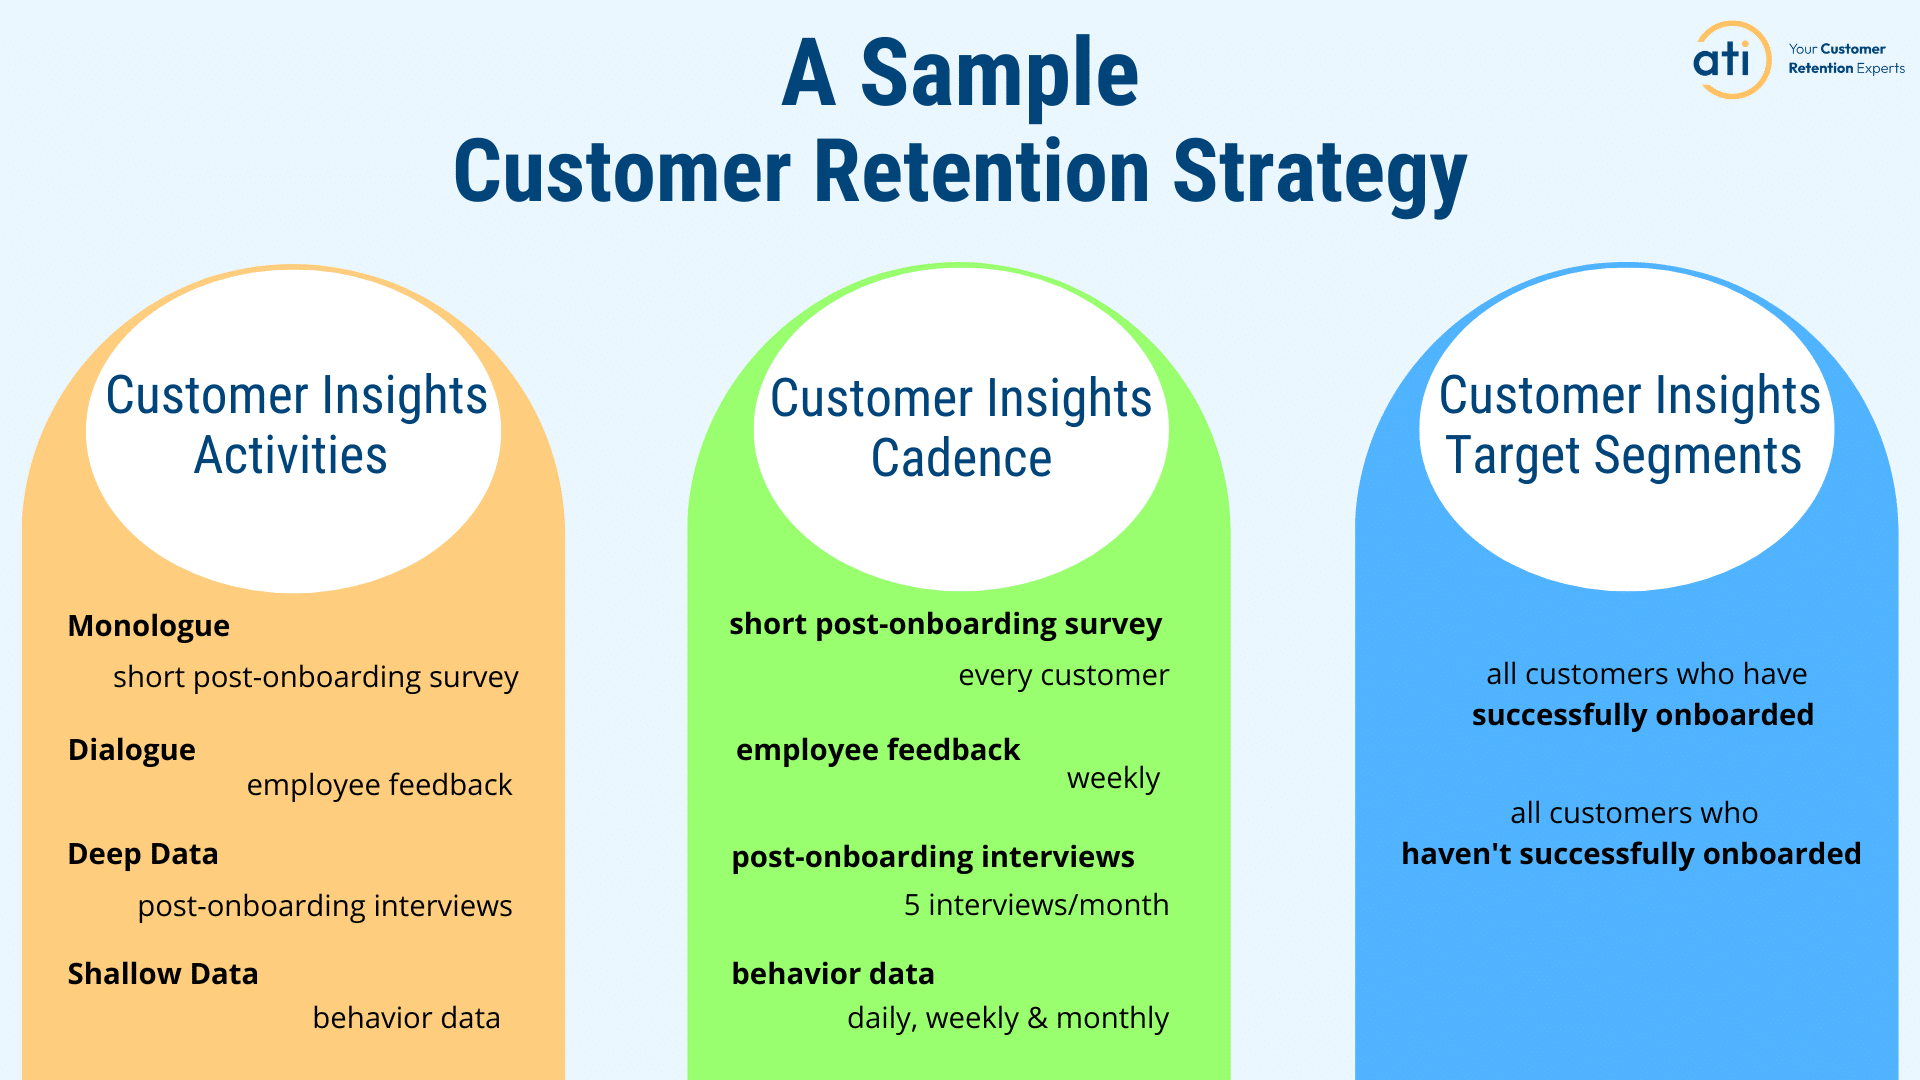 A sample customer retention strategy including customer insight activities customer insights cadence and customer insights target segments